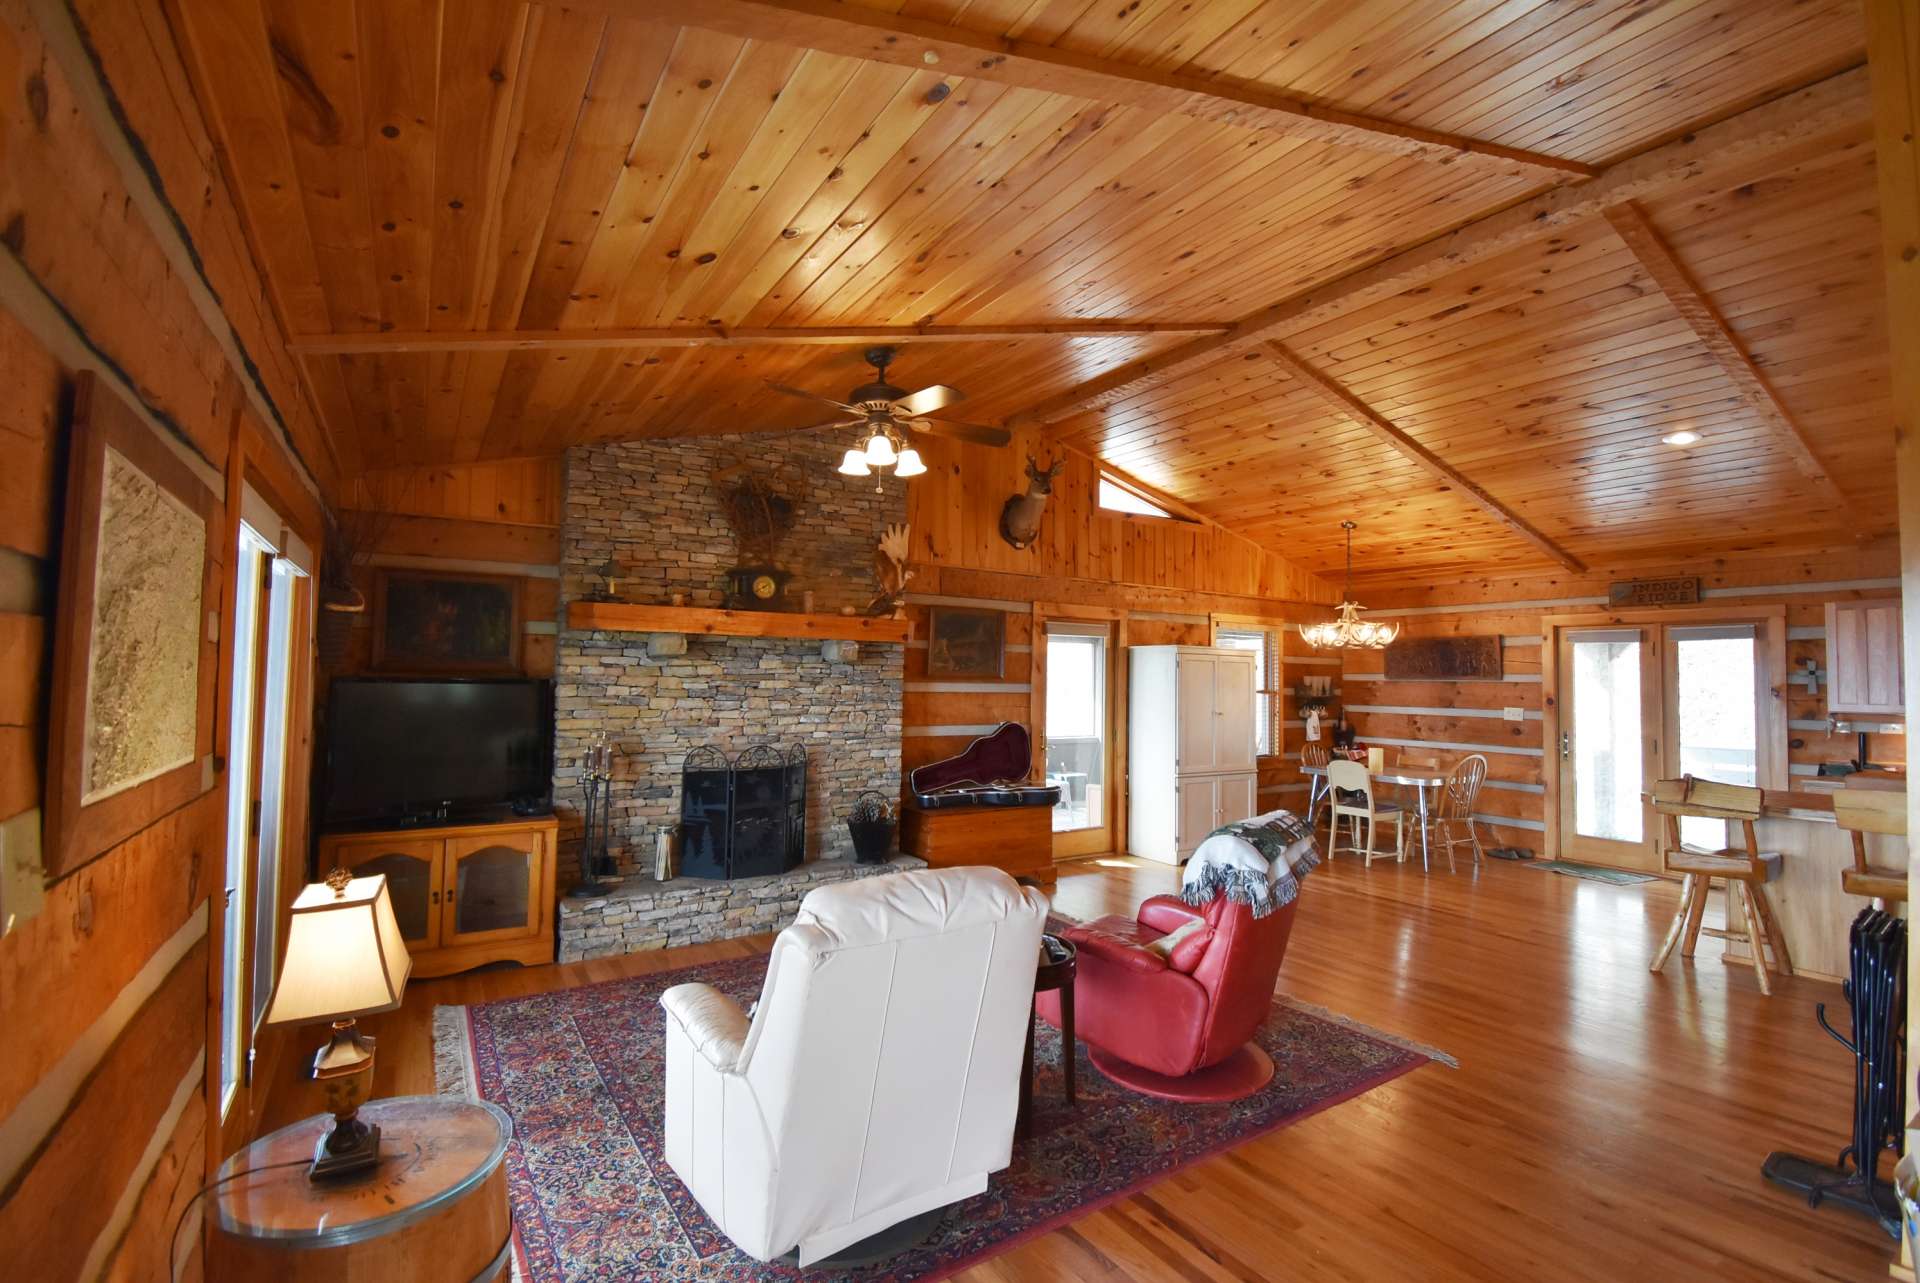 Upon entering the cabin, your focus is directed to the beautiful vaulted wood ceiling, gleaming wood floors, and the stone  wood burning fireplace.